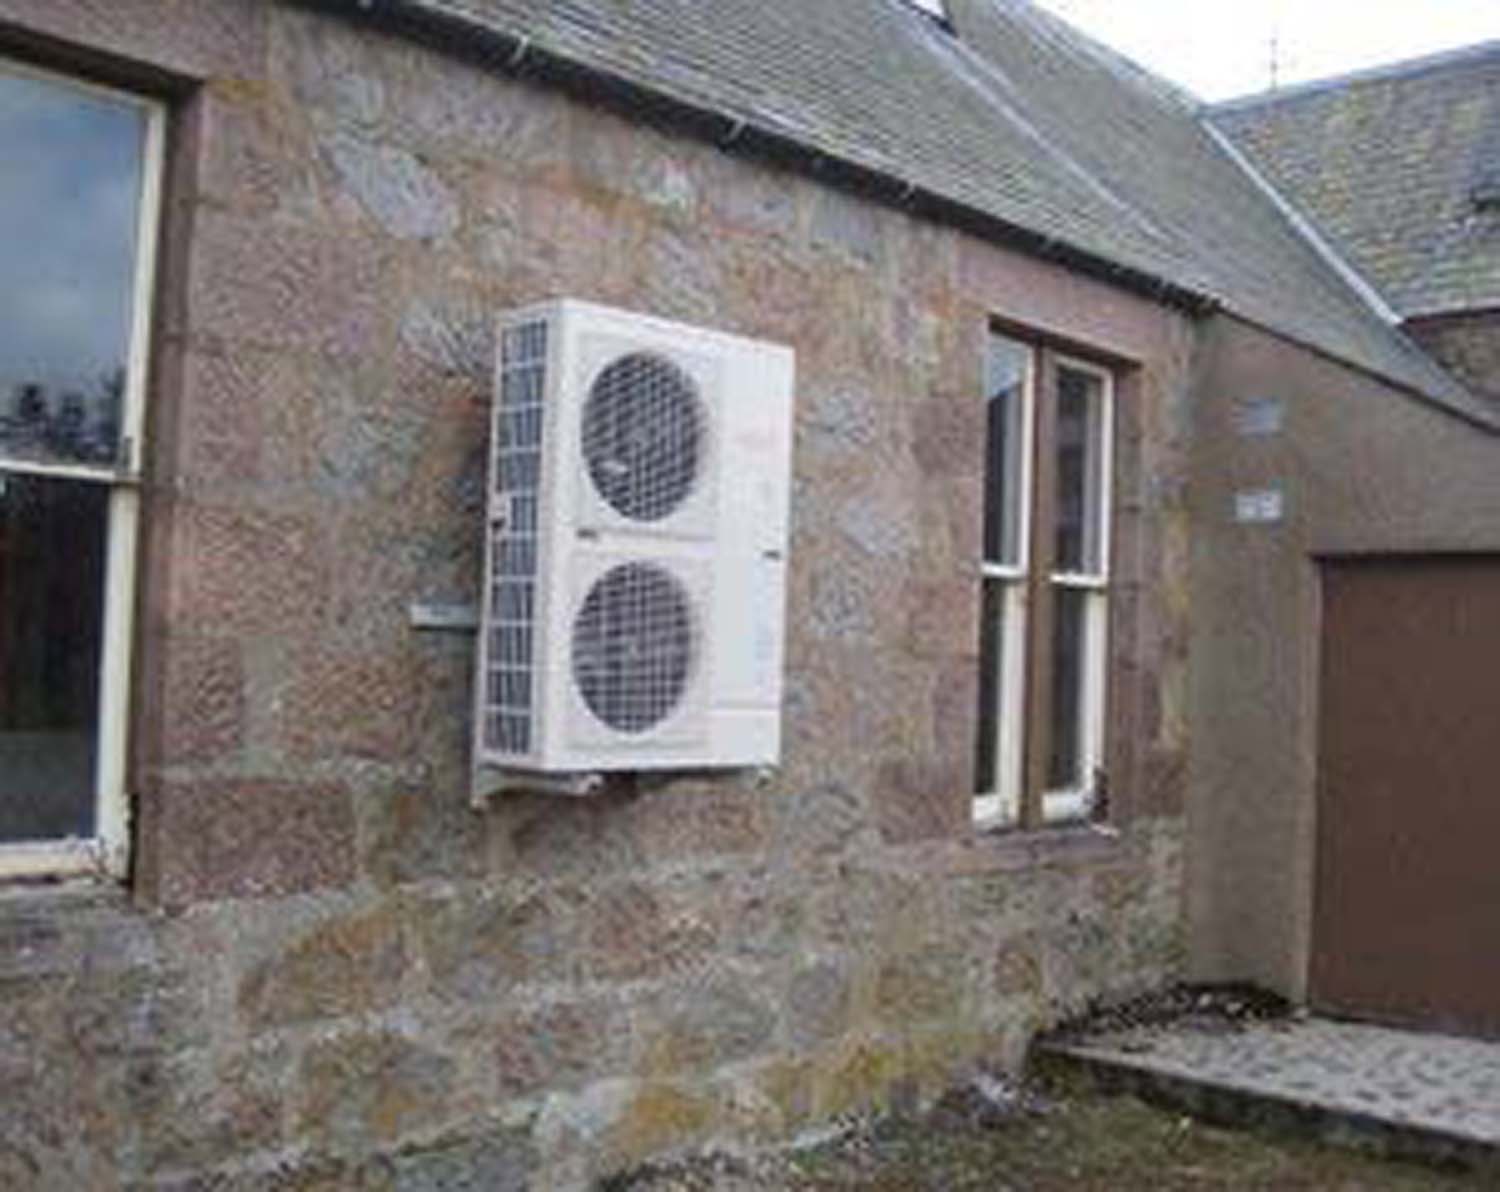 A photograph of a white air source heat pump on the grey stonewall of a single-storey building